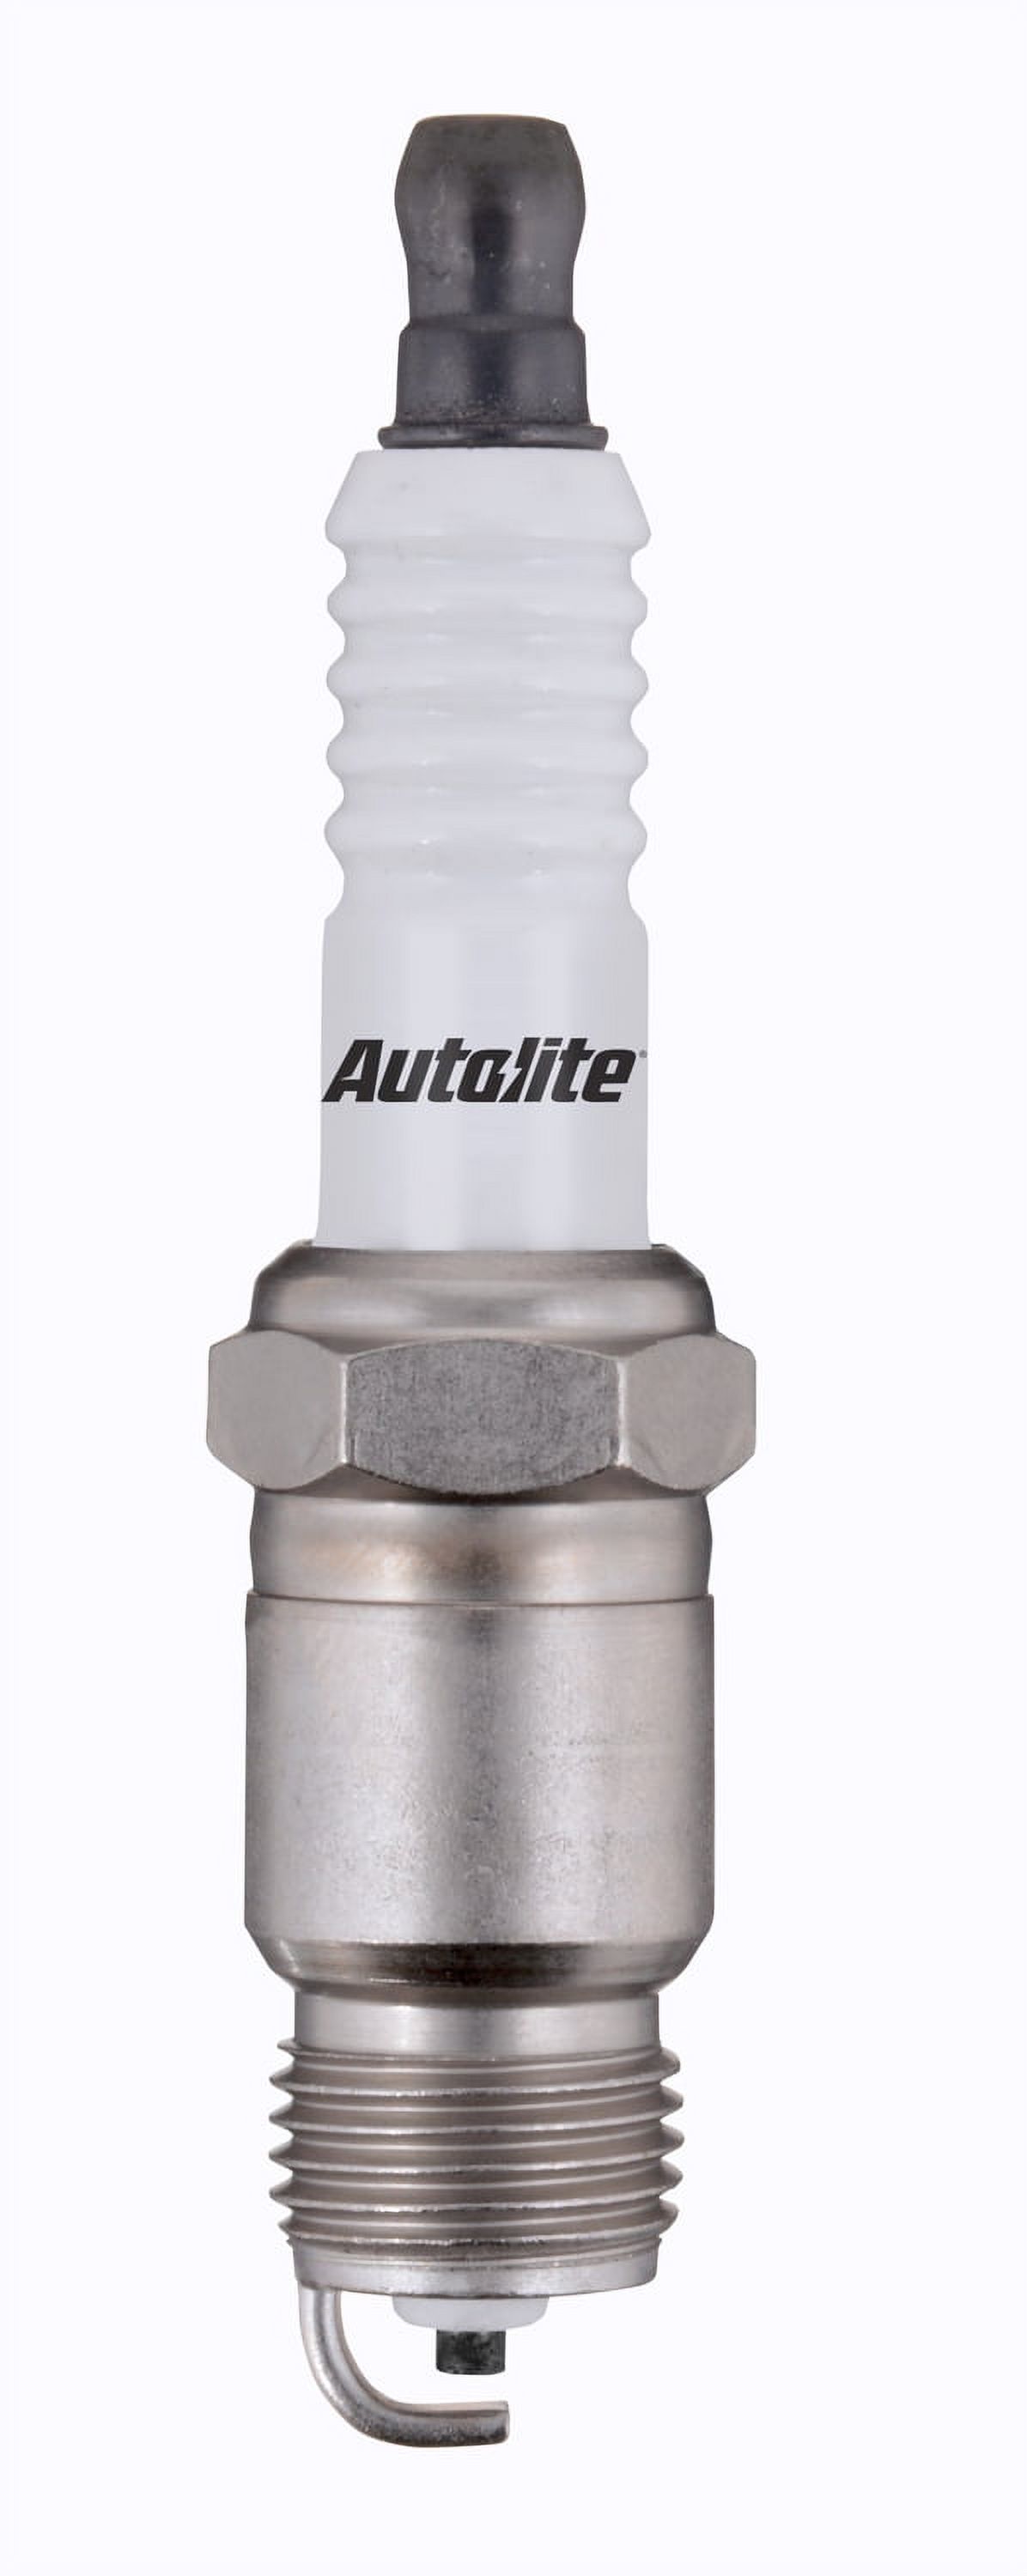 Autolite 25 Copper Spark Plug Fits select: 1987-1996 FORD F150, 1988-1995 CHEVROLET GMT-400 - image 1 of 3